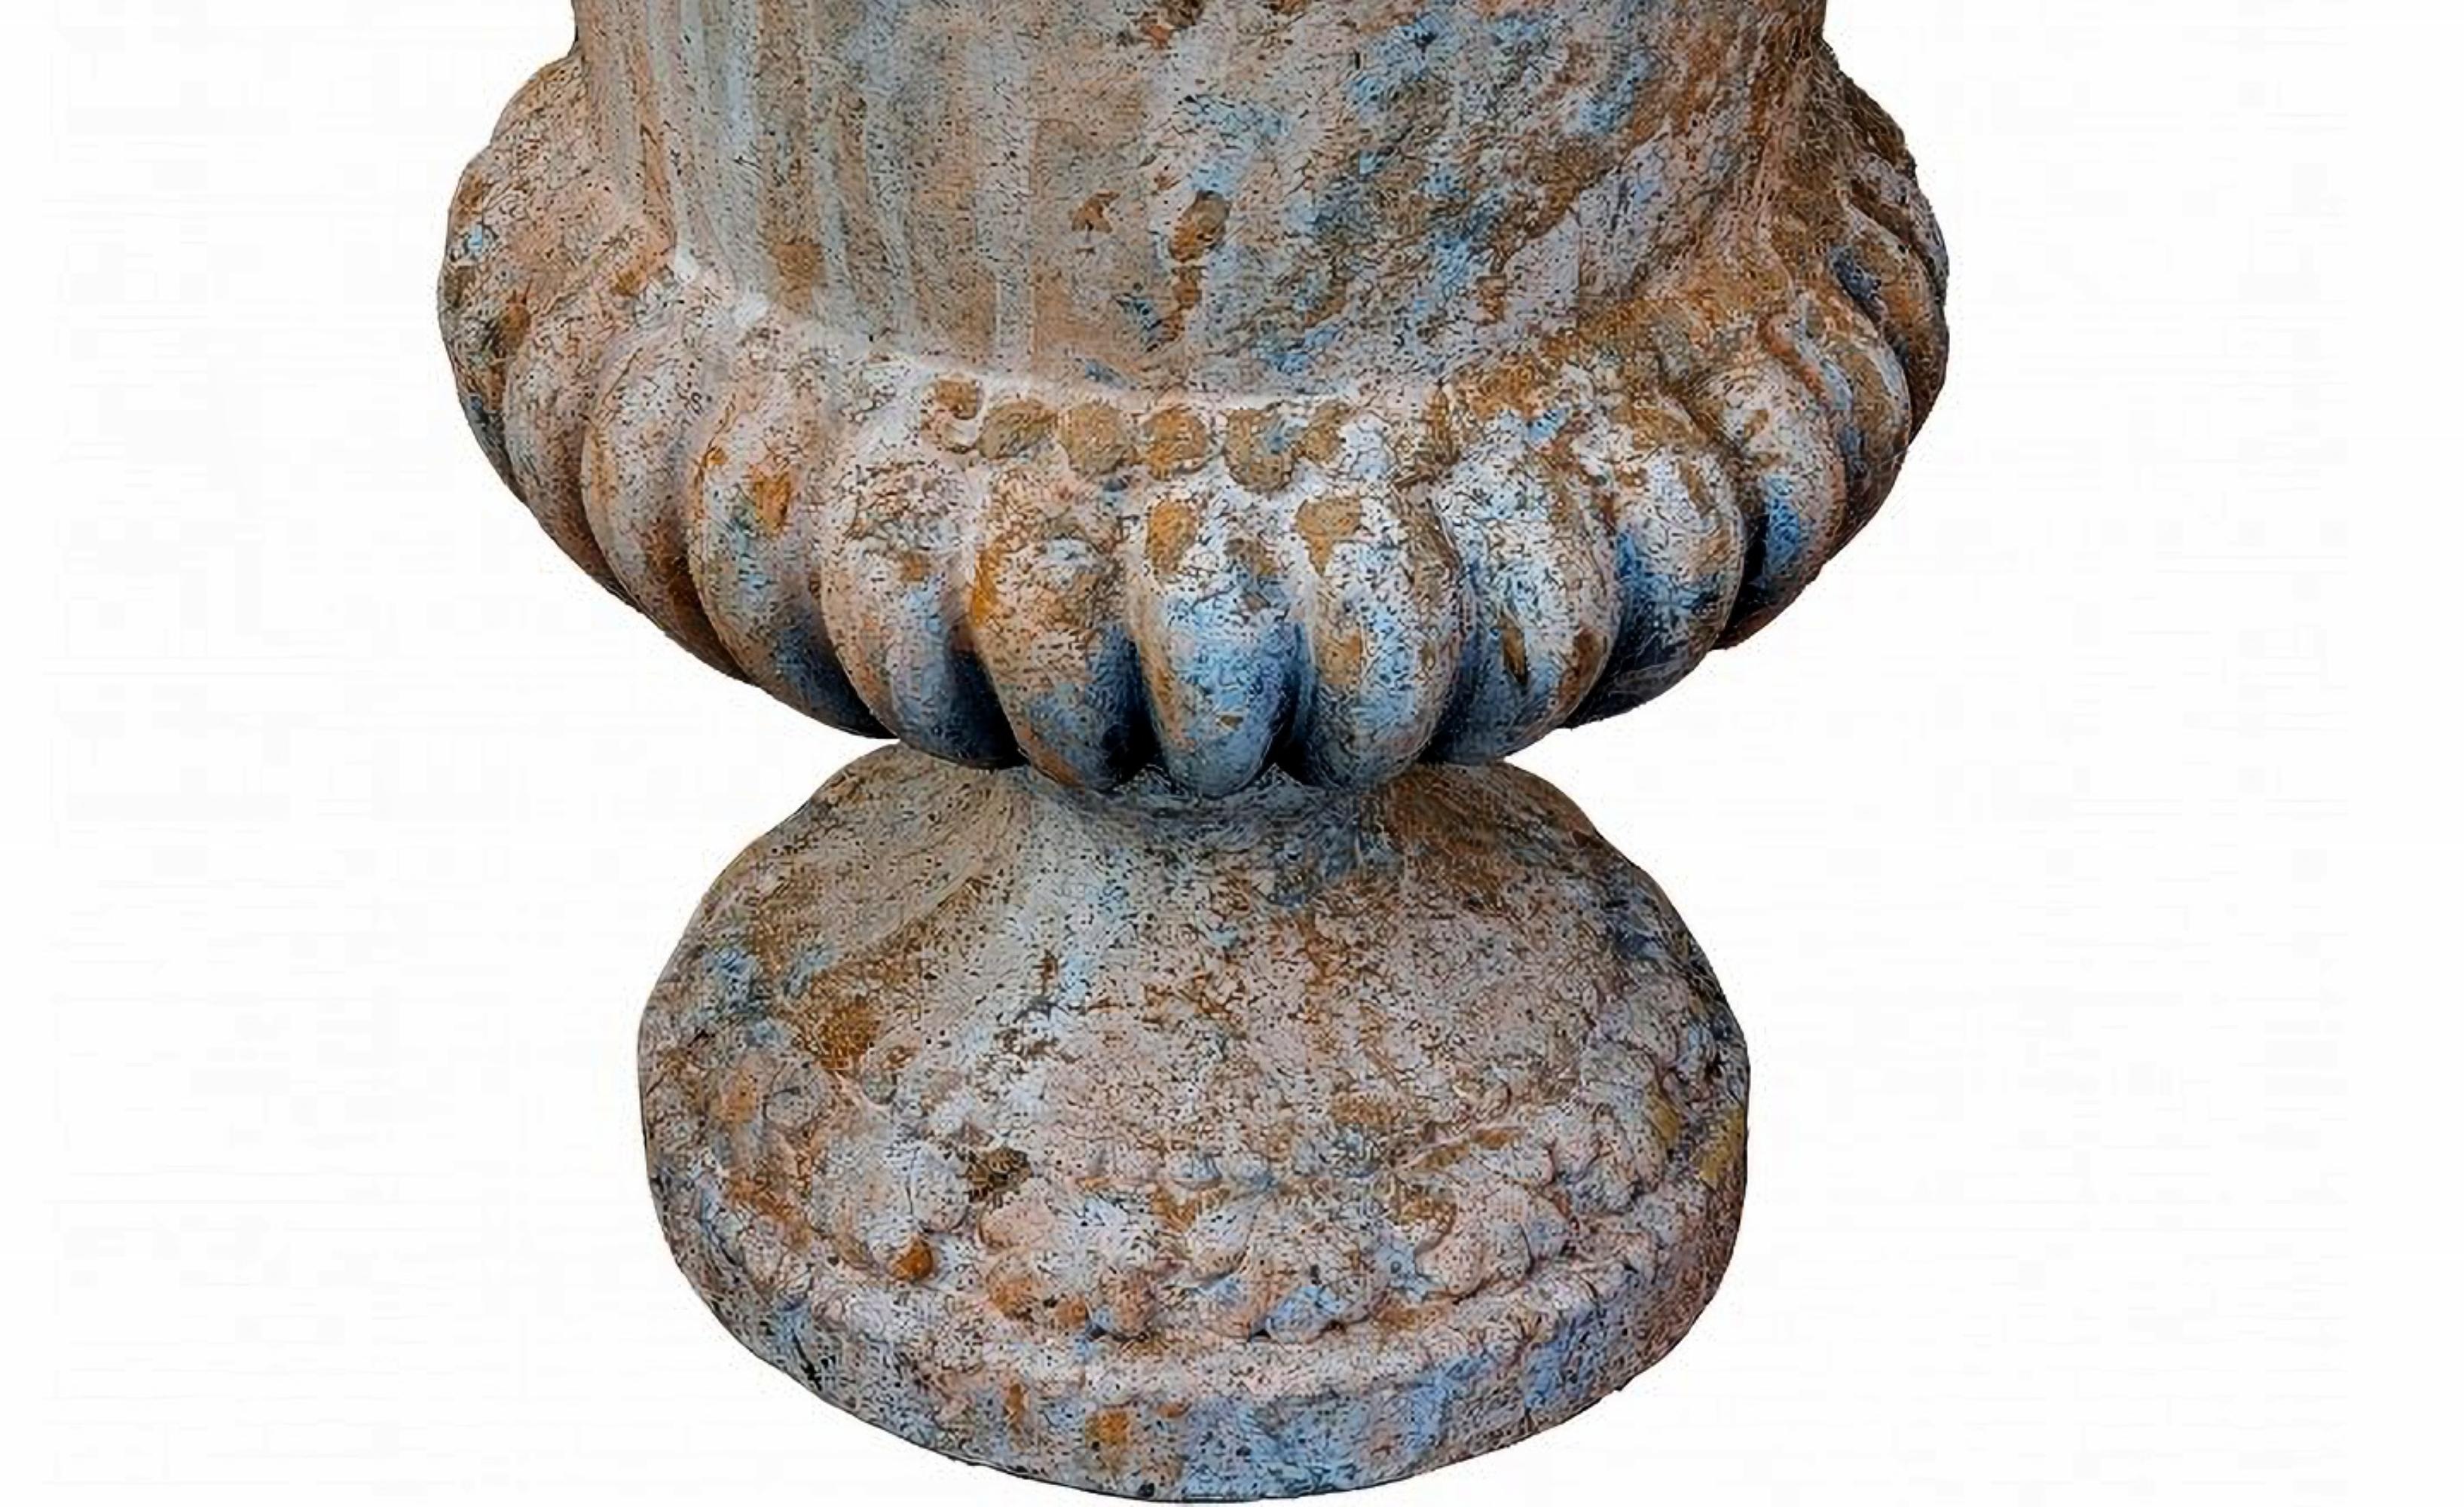 COPY OF ANCIENT 17th Century SIENESE VASE IN TERRACOTTA end 19th Century

Sienese ORNAMENTAL VASE for GATE and FENCE.
Medici chalice decorated with crowns of leaves and three crowns of mamille 24 vertical pods.

HEIGHT 42cm
INTERNAL DEPTH OF THE